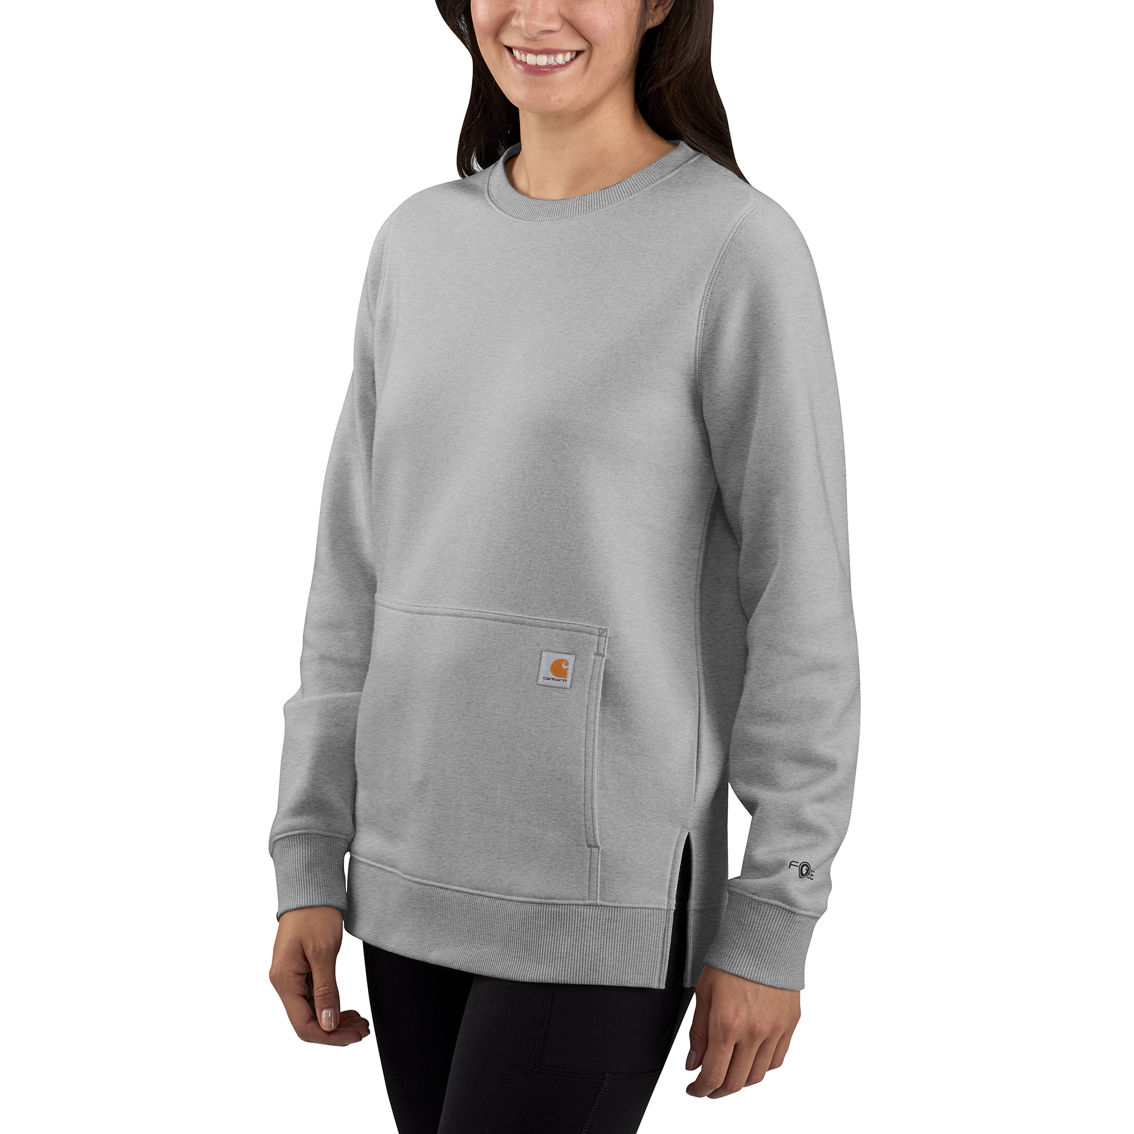 Carhartt Force Relaxed Fit Lightweight Sweatshirt | Tops | Clothing ...